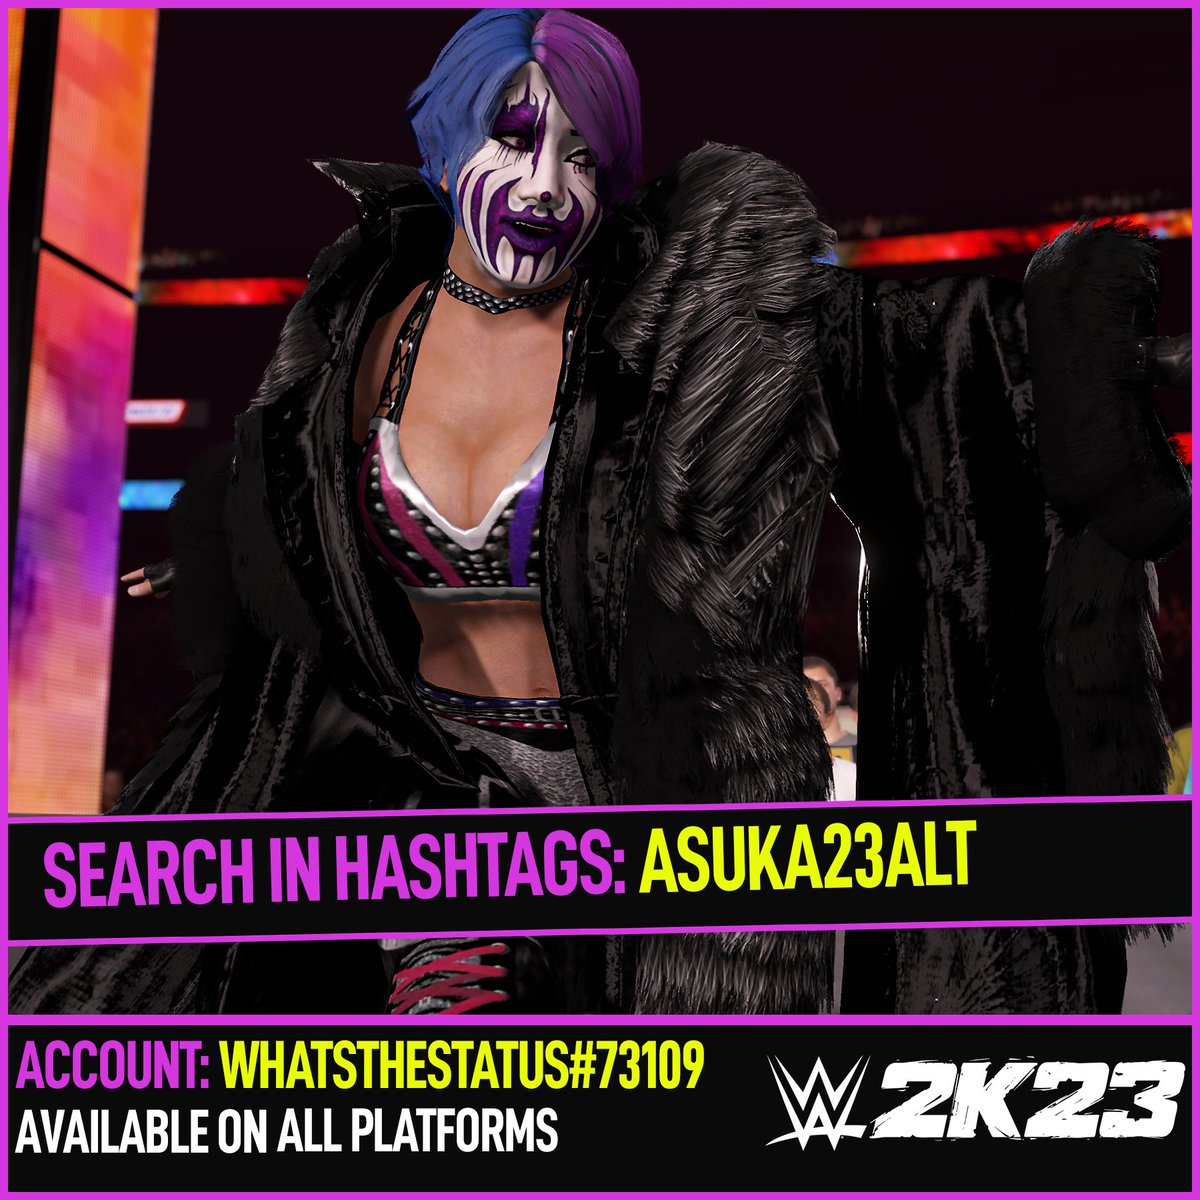 NEW! #WWE2K23 Upload To Community Creations! ★ Asuka '23 ★ Search Tag → ASUKA23ALT or WhatsTheStatus ★ Collaboration with @cawsmicangels & @Stephs0nlyFan ★ INCLUDES ● Custom Portrait ● Commentary (Asuka) ● Ring Announcer Name (Asuka) ● 2 alternative Face Paints ●…